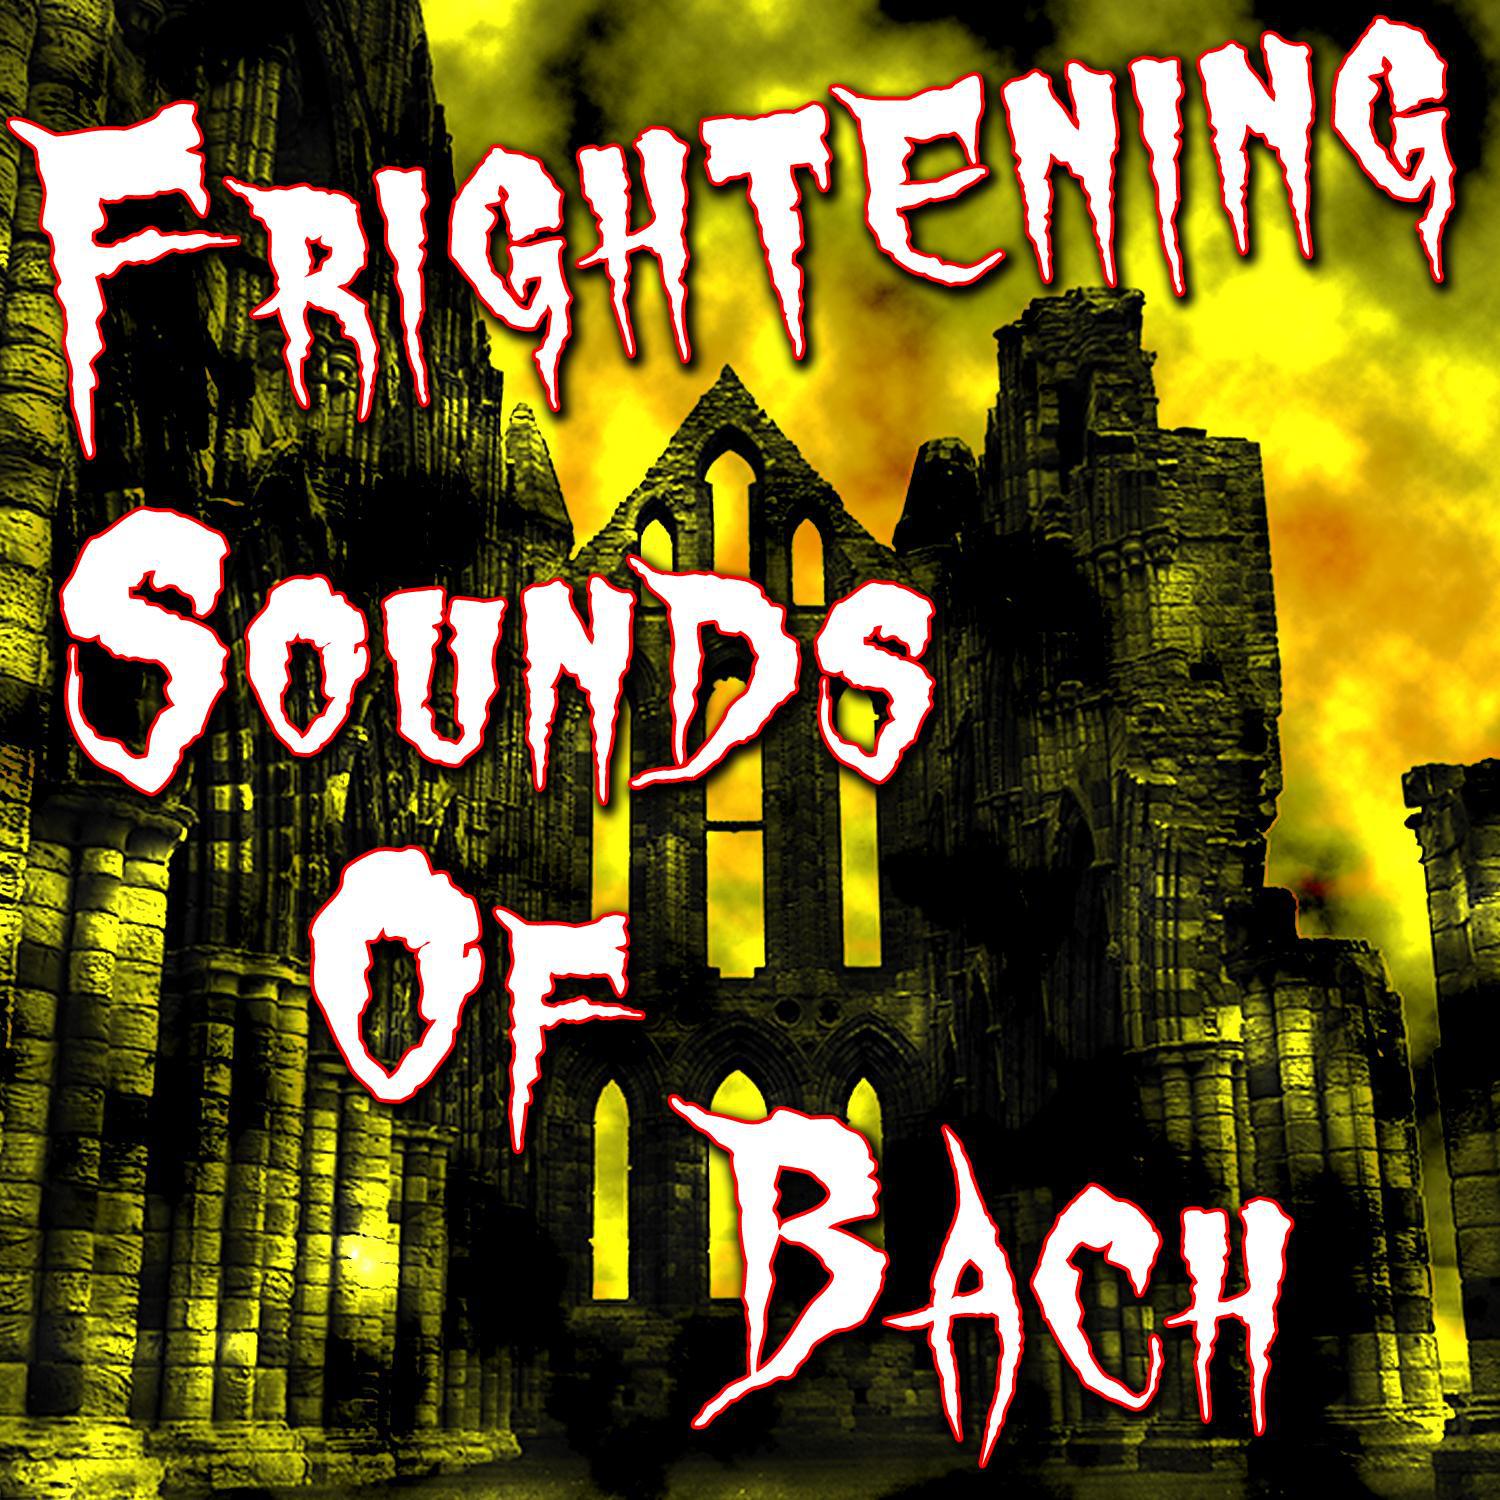 Frightening Sounds of Bach专辑